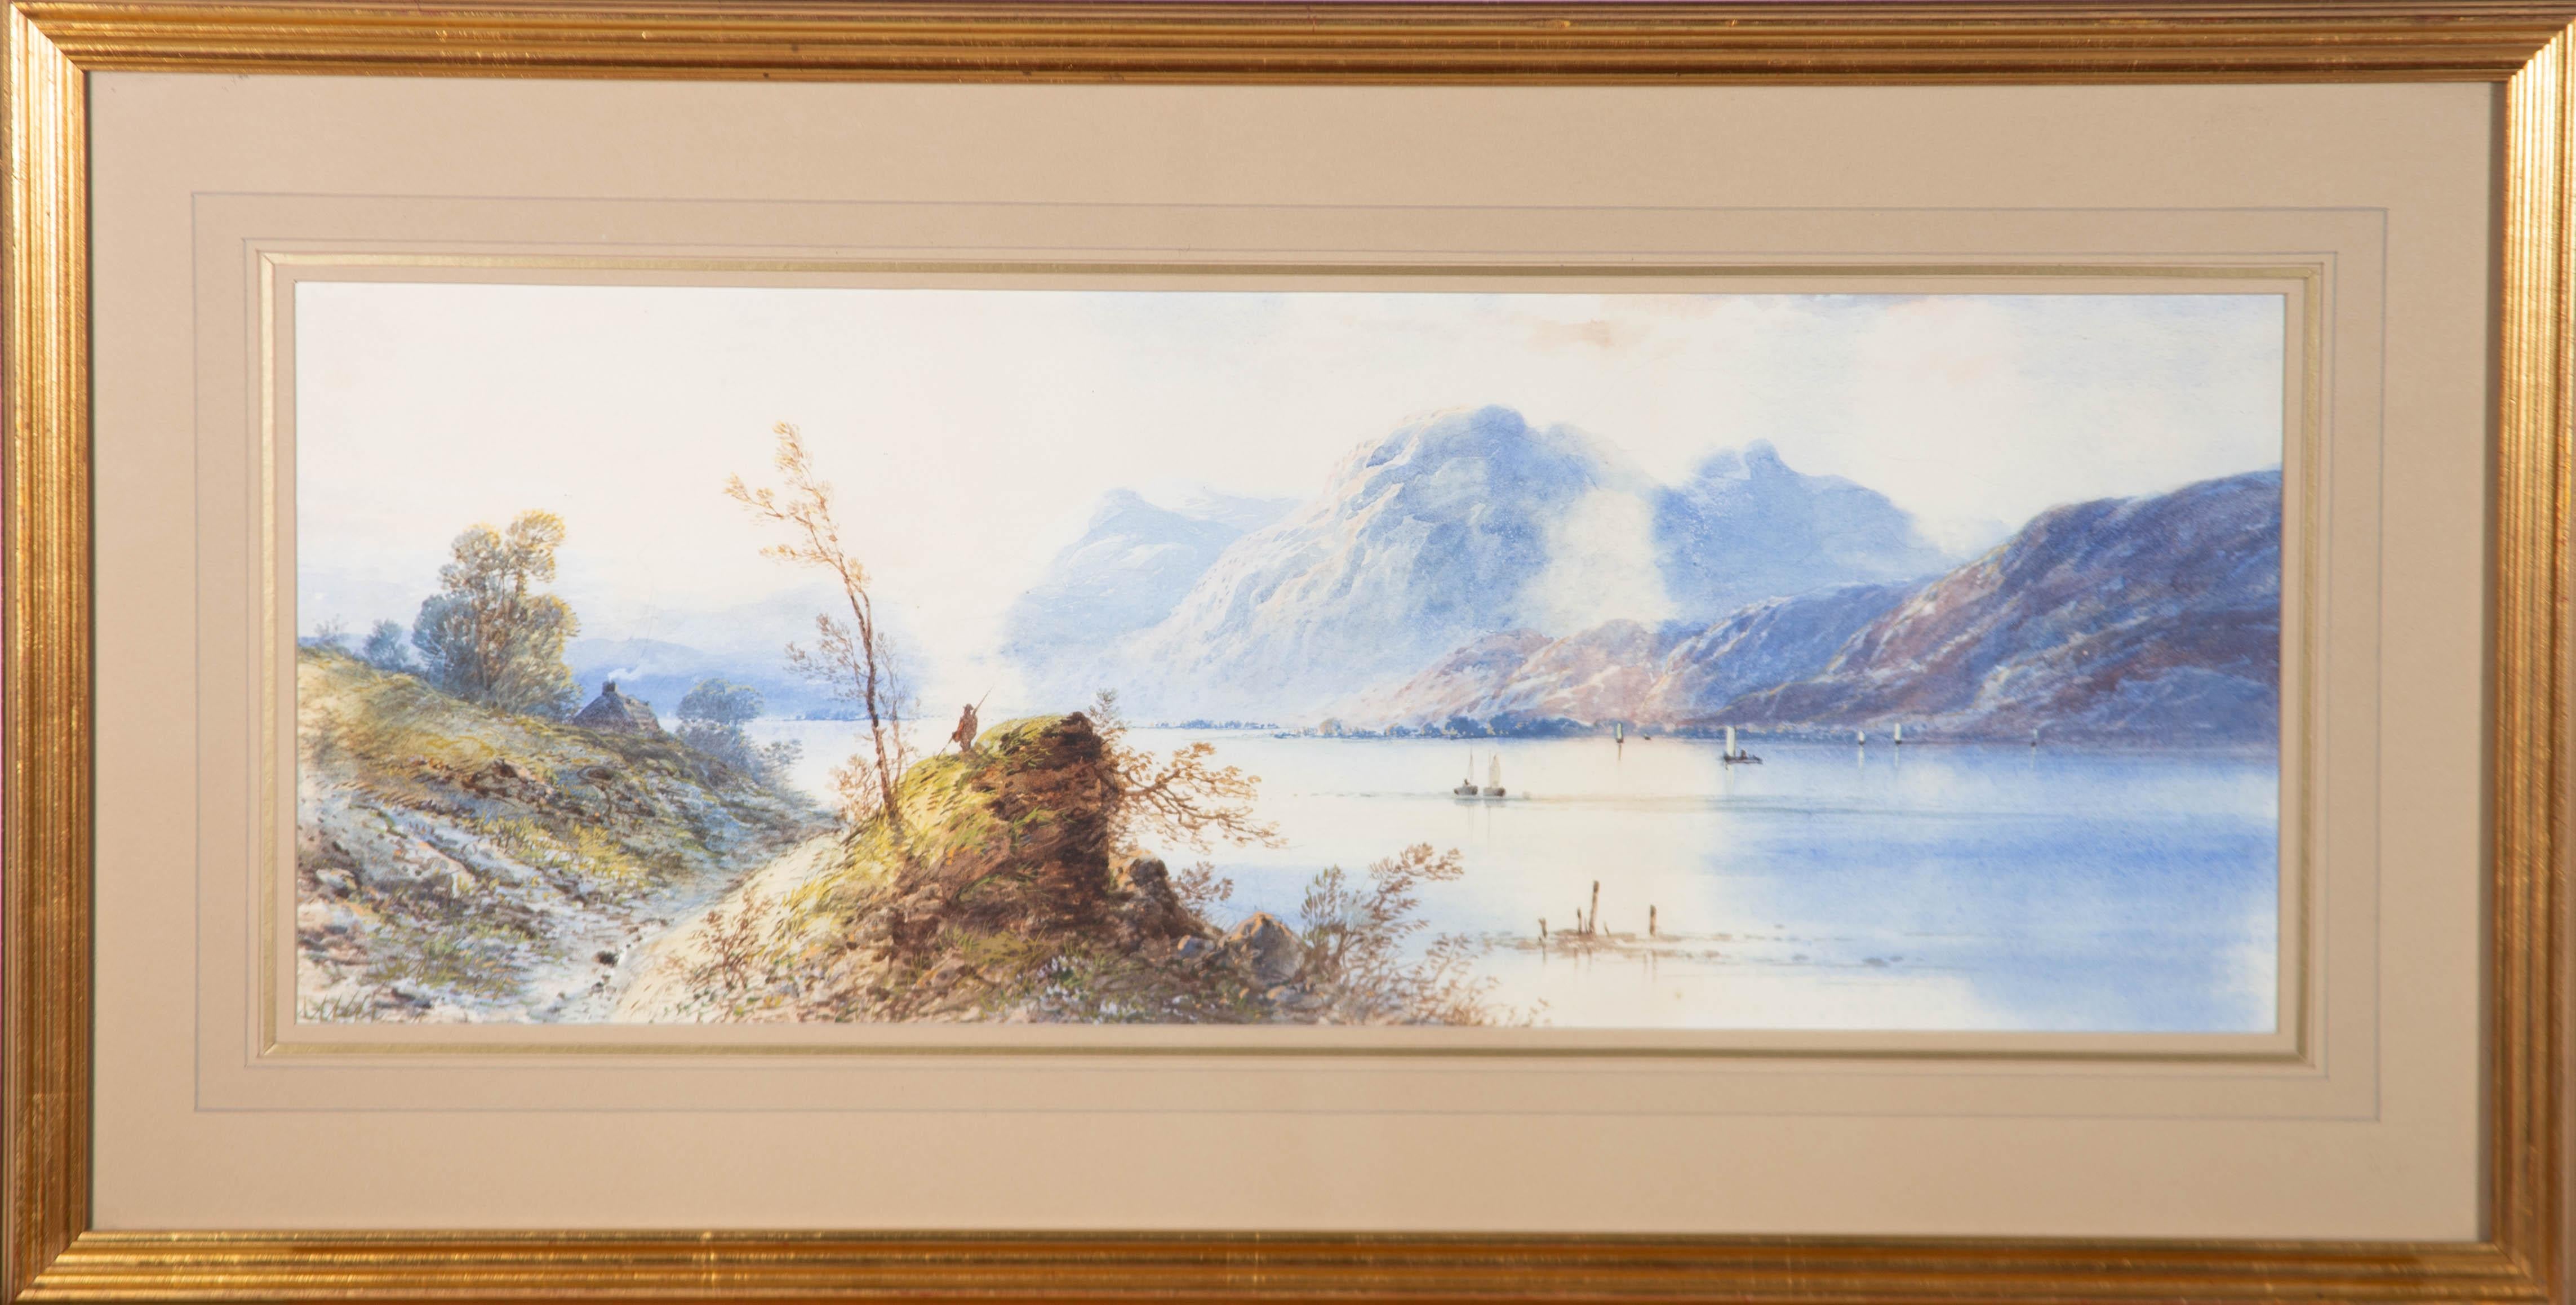 A beautifully proportioned watercolour by Edwin Earp, showing a lake in the foothills of a misty mountain. The lake is dotted with boats and a small cottage with a smoking chimney.

The painting has been presented in a glazed, gilt frame with a